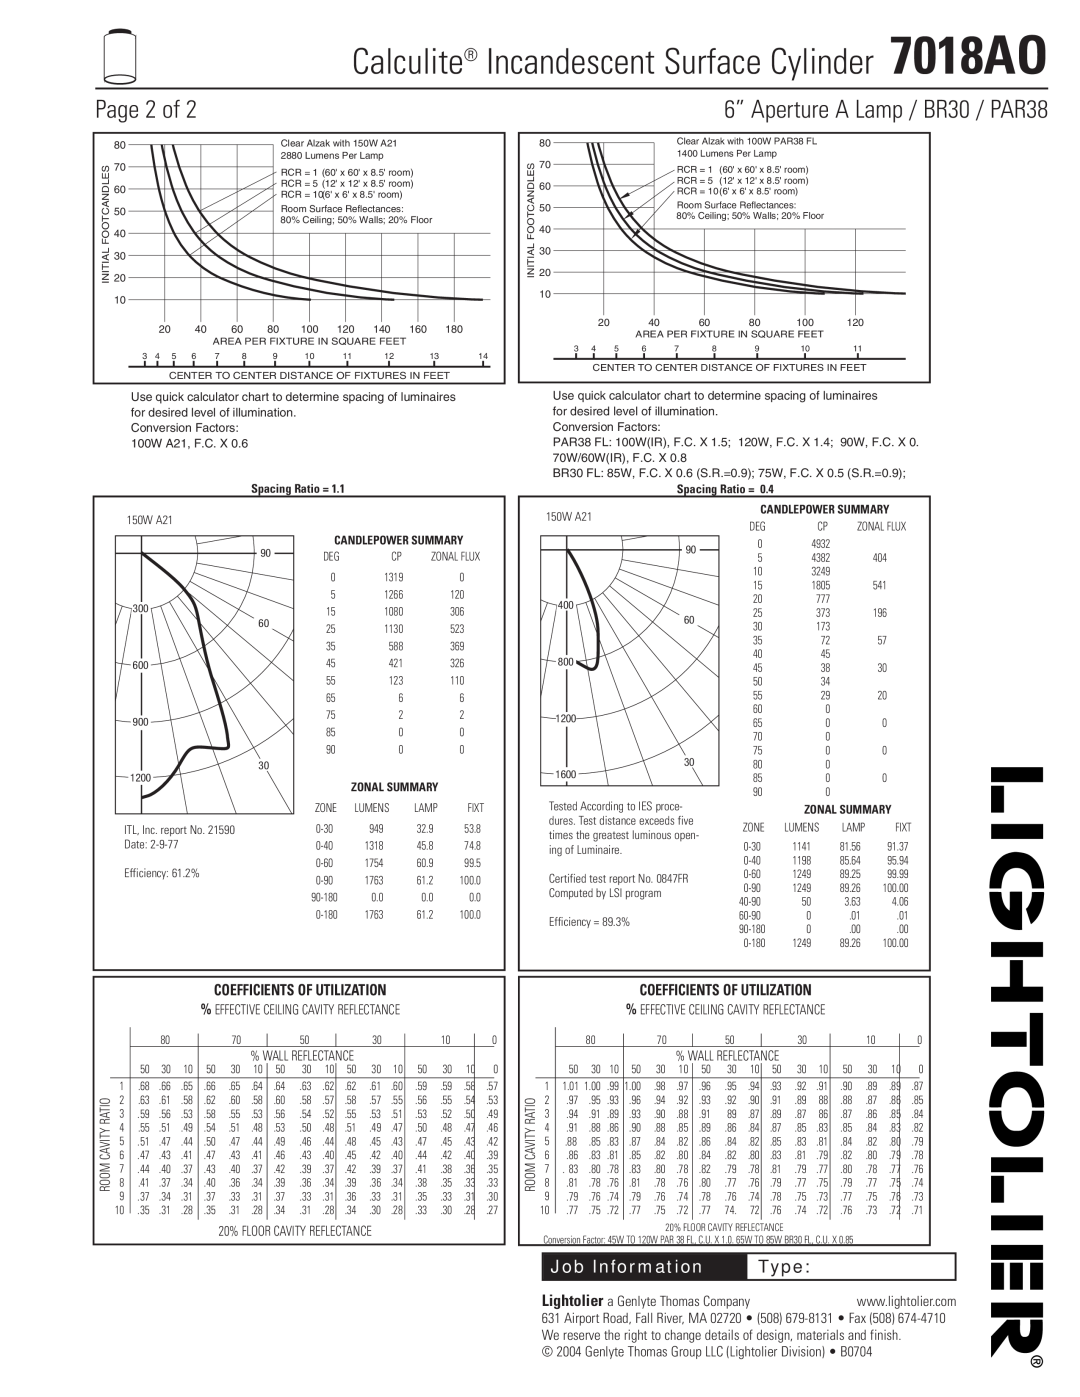 Lightolier Coefficients Of Utilization, Calculite Incandescent Surface Cylinder 7018AO, Page 2 of, Job Information 